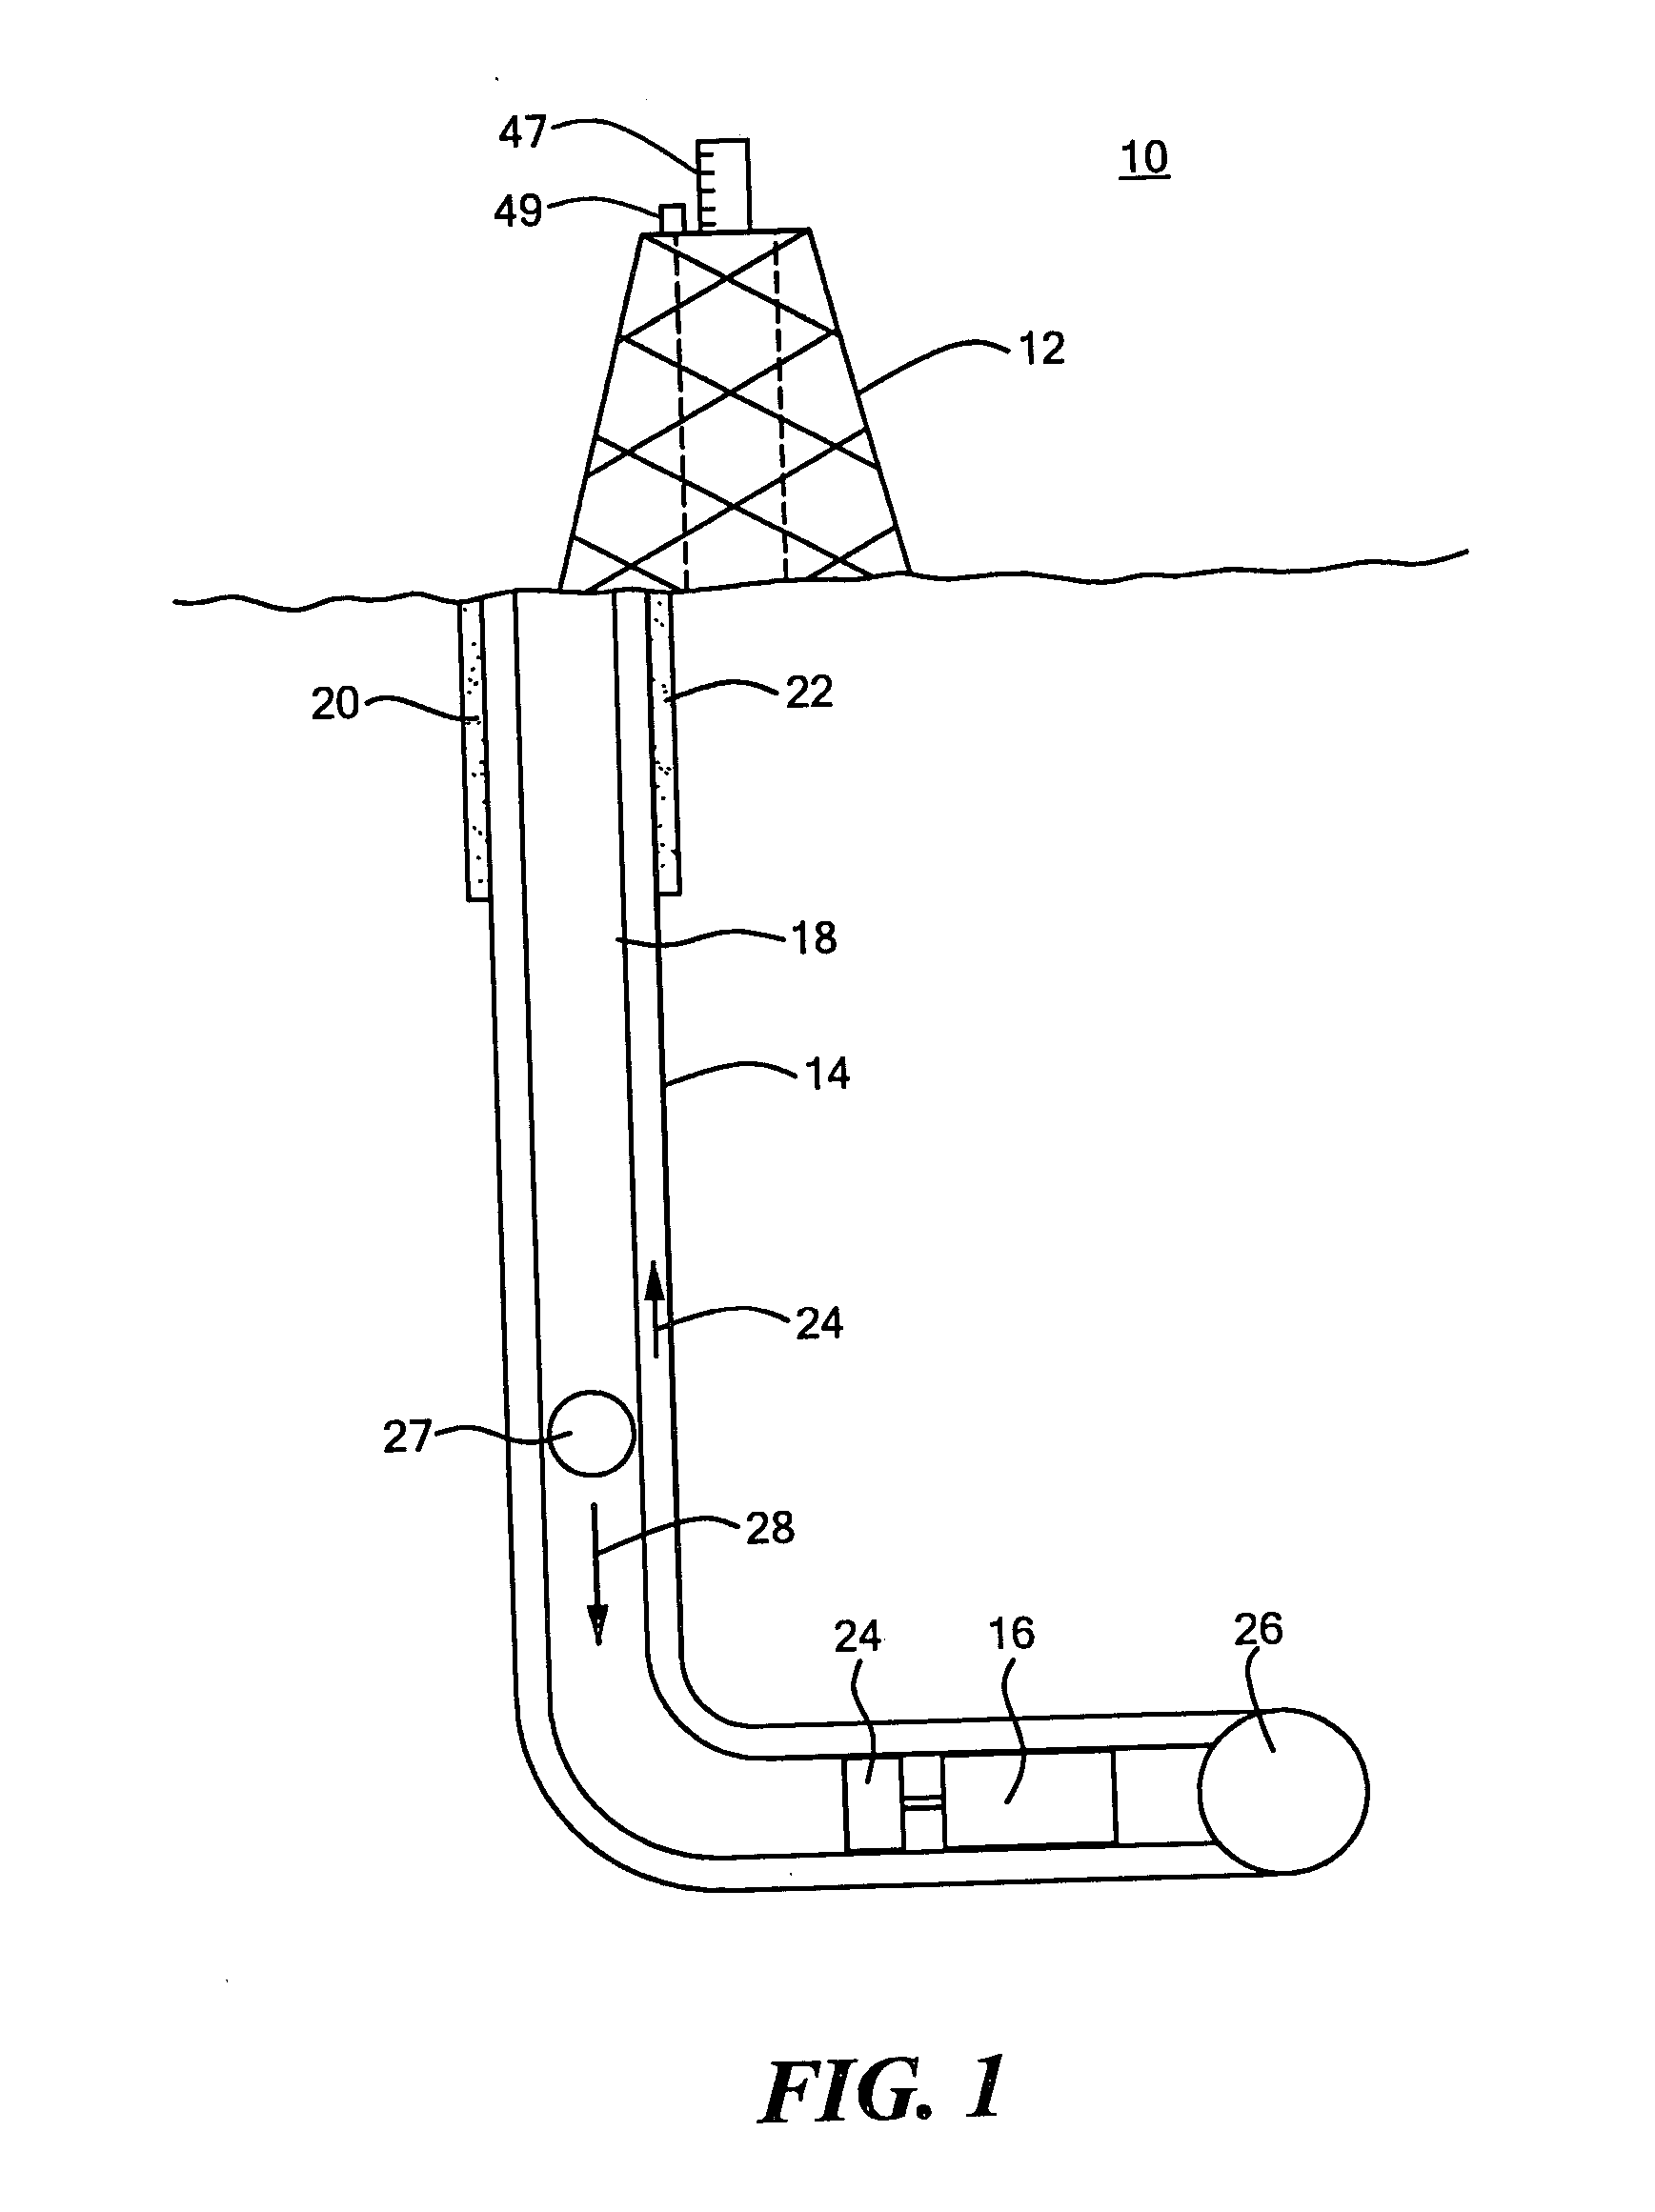 Compact navigation system and method